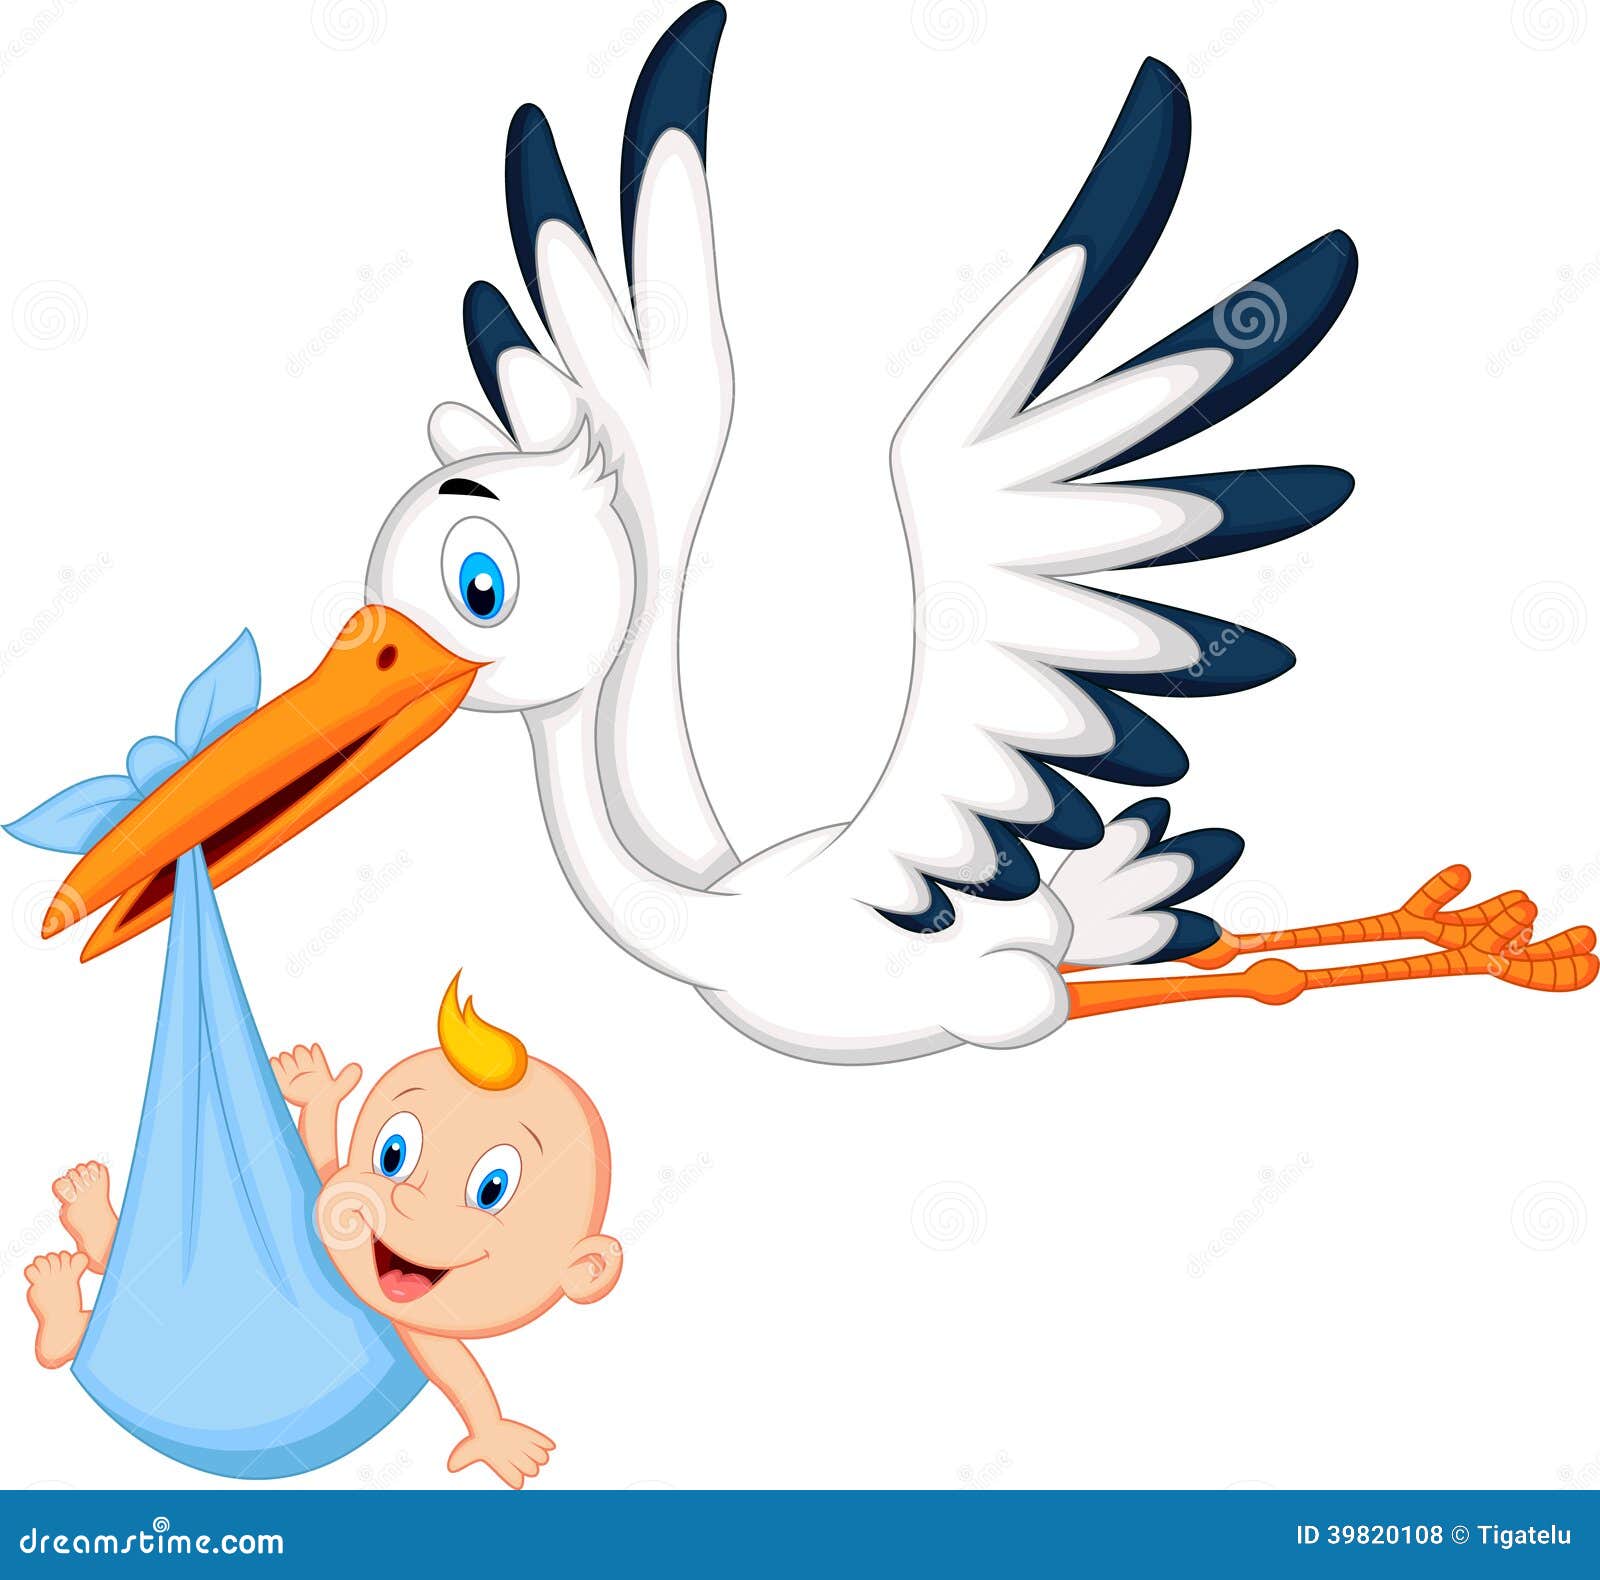 clipart image stork holding a baby - photo #12